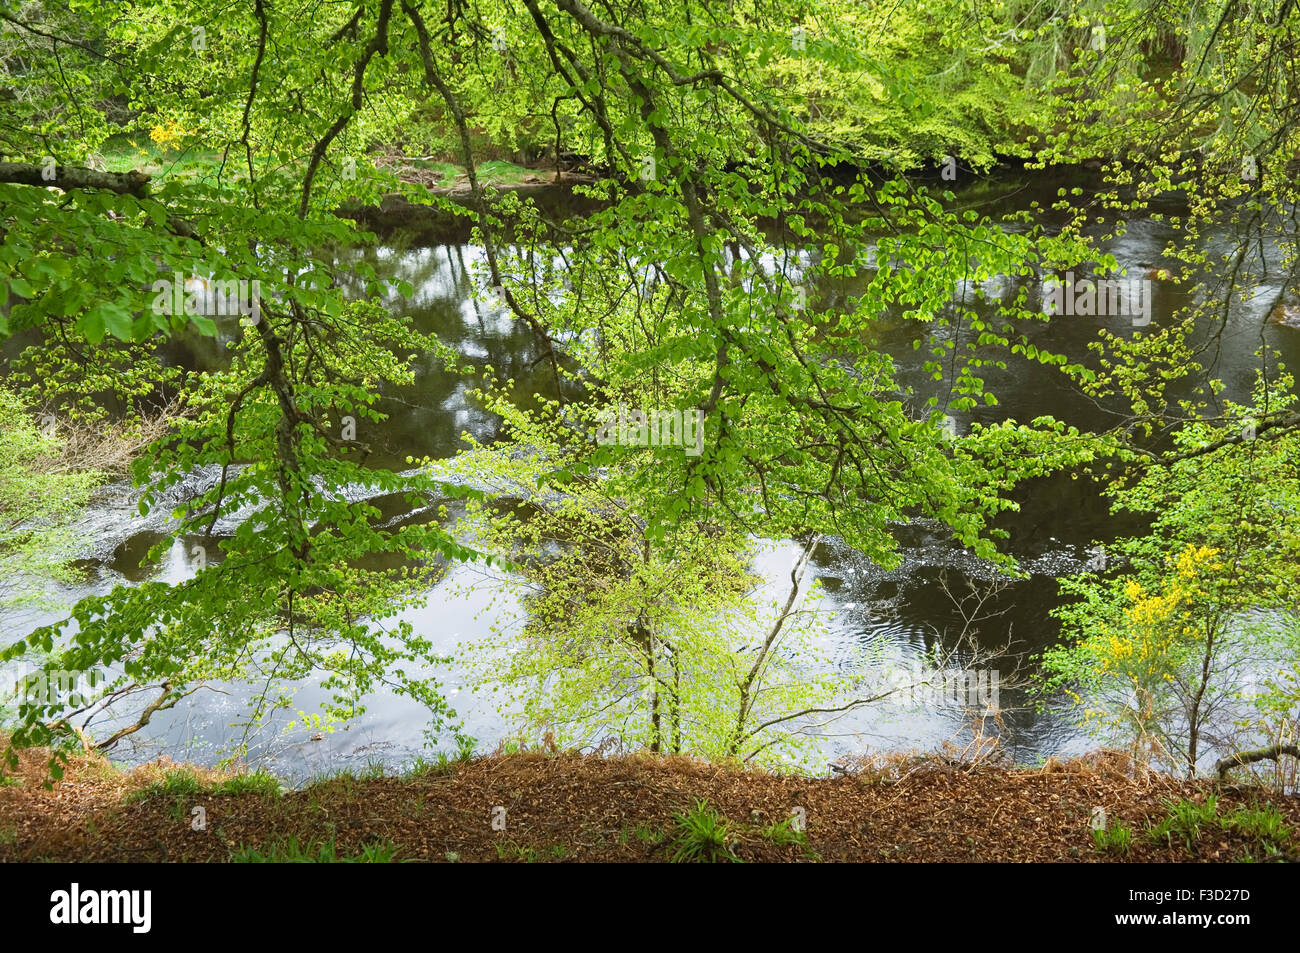 The River Findhorn in spring near Logie Steading, Moray, Scotland. Stock Photo